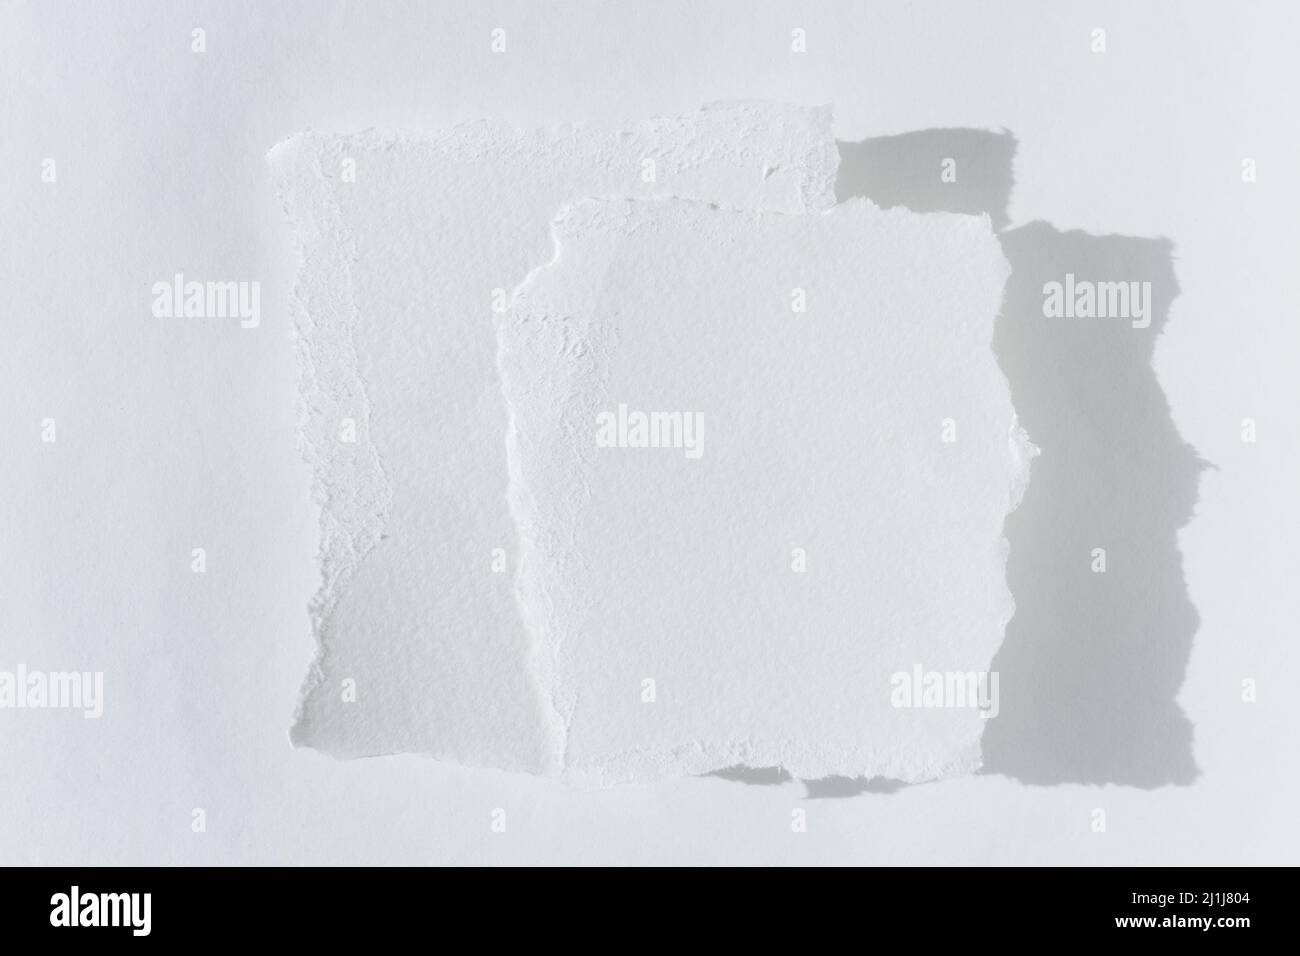 A white torn note, scraps of paper. Two pieces of torn white paper on a light background. Stock Photo